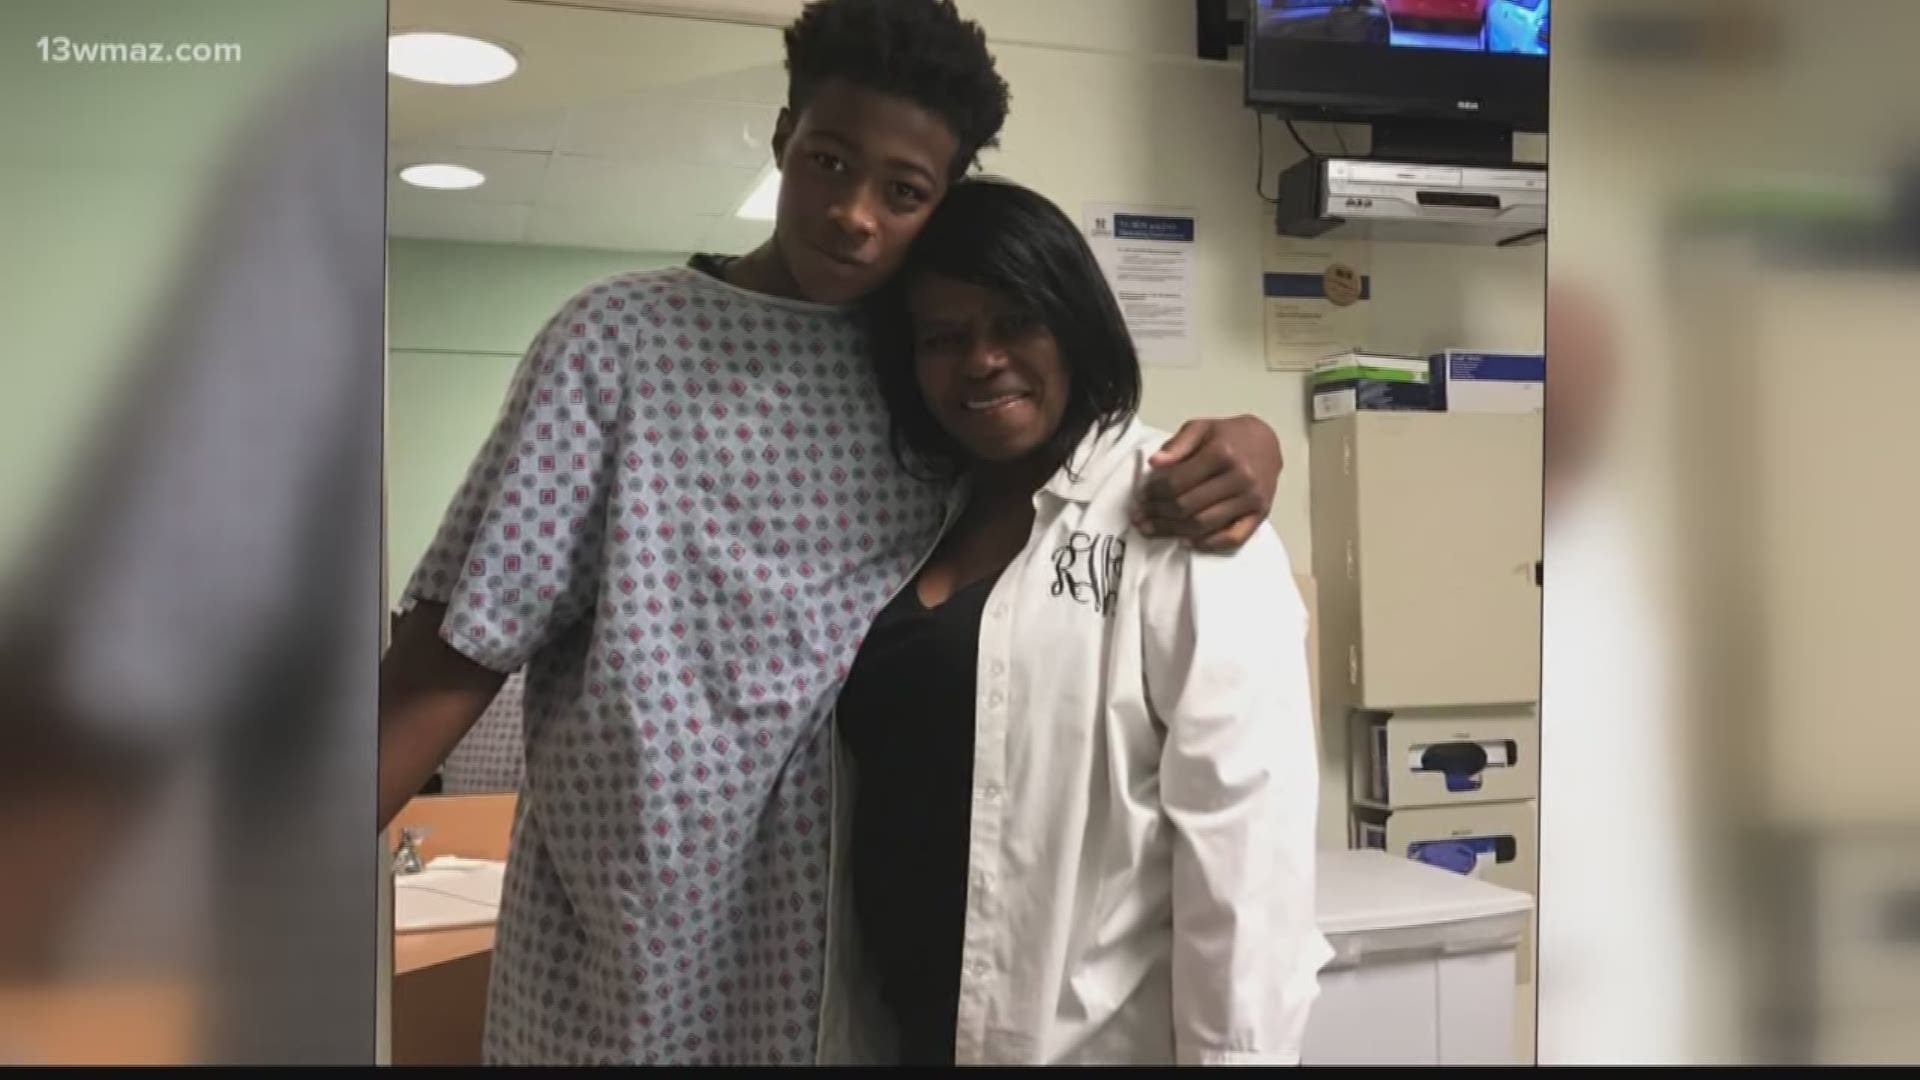 A two-year search for a kidney had a happy ending for a Mary Persons high school student athlete. Amari Jefferson and his family never gave up hope.